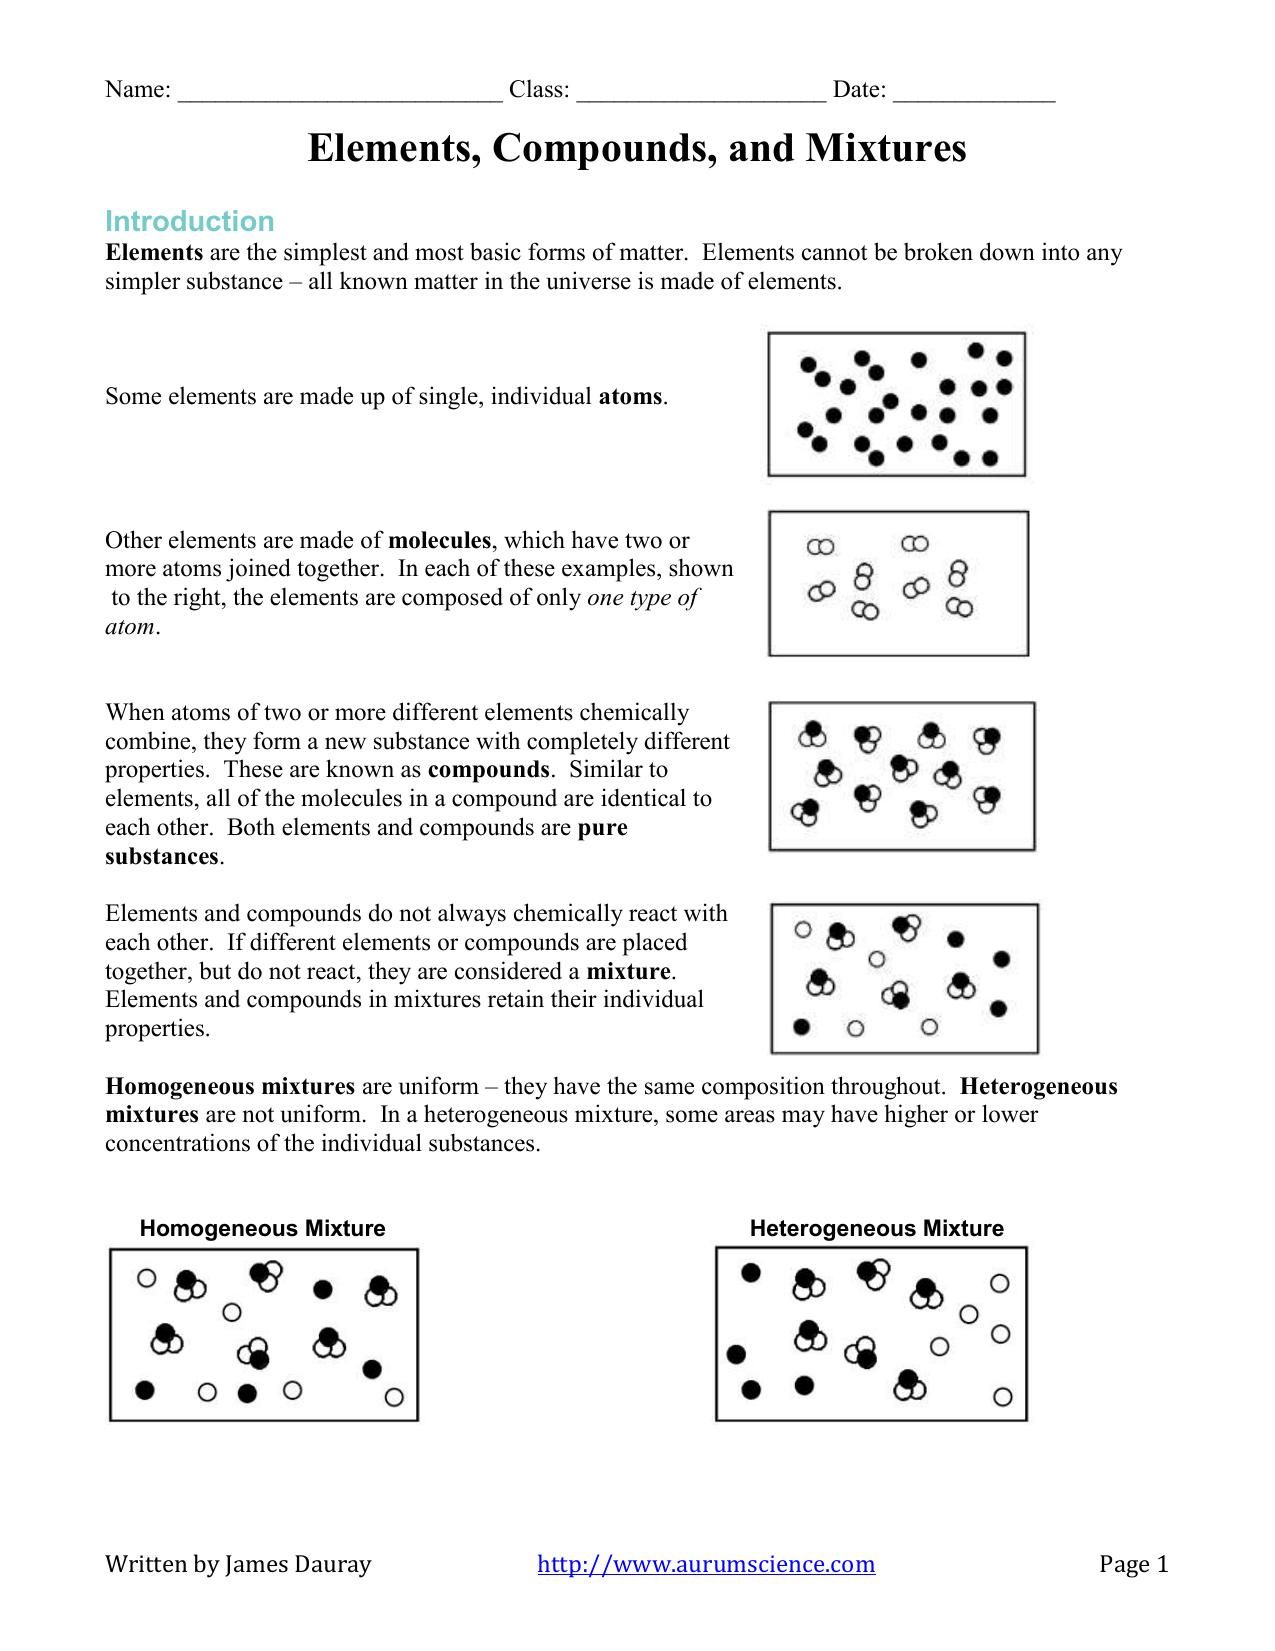 Elements, Compounds, and Mixtures Worksheet Intended For Elements And Compounds Worksheet